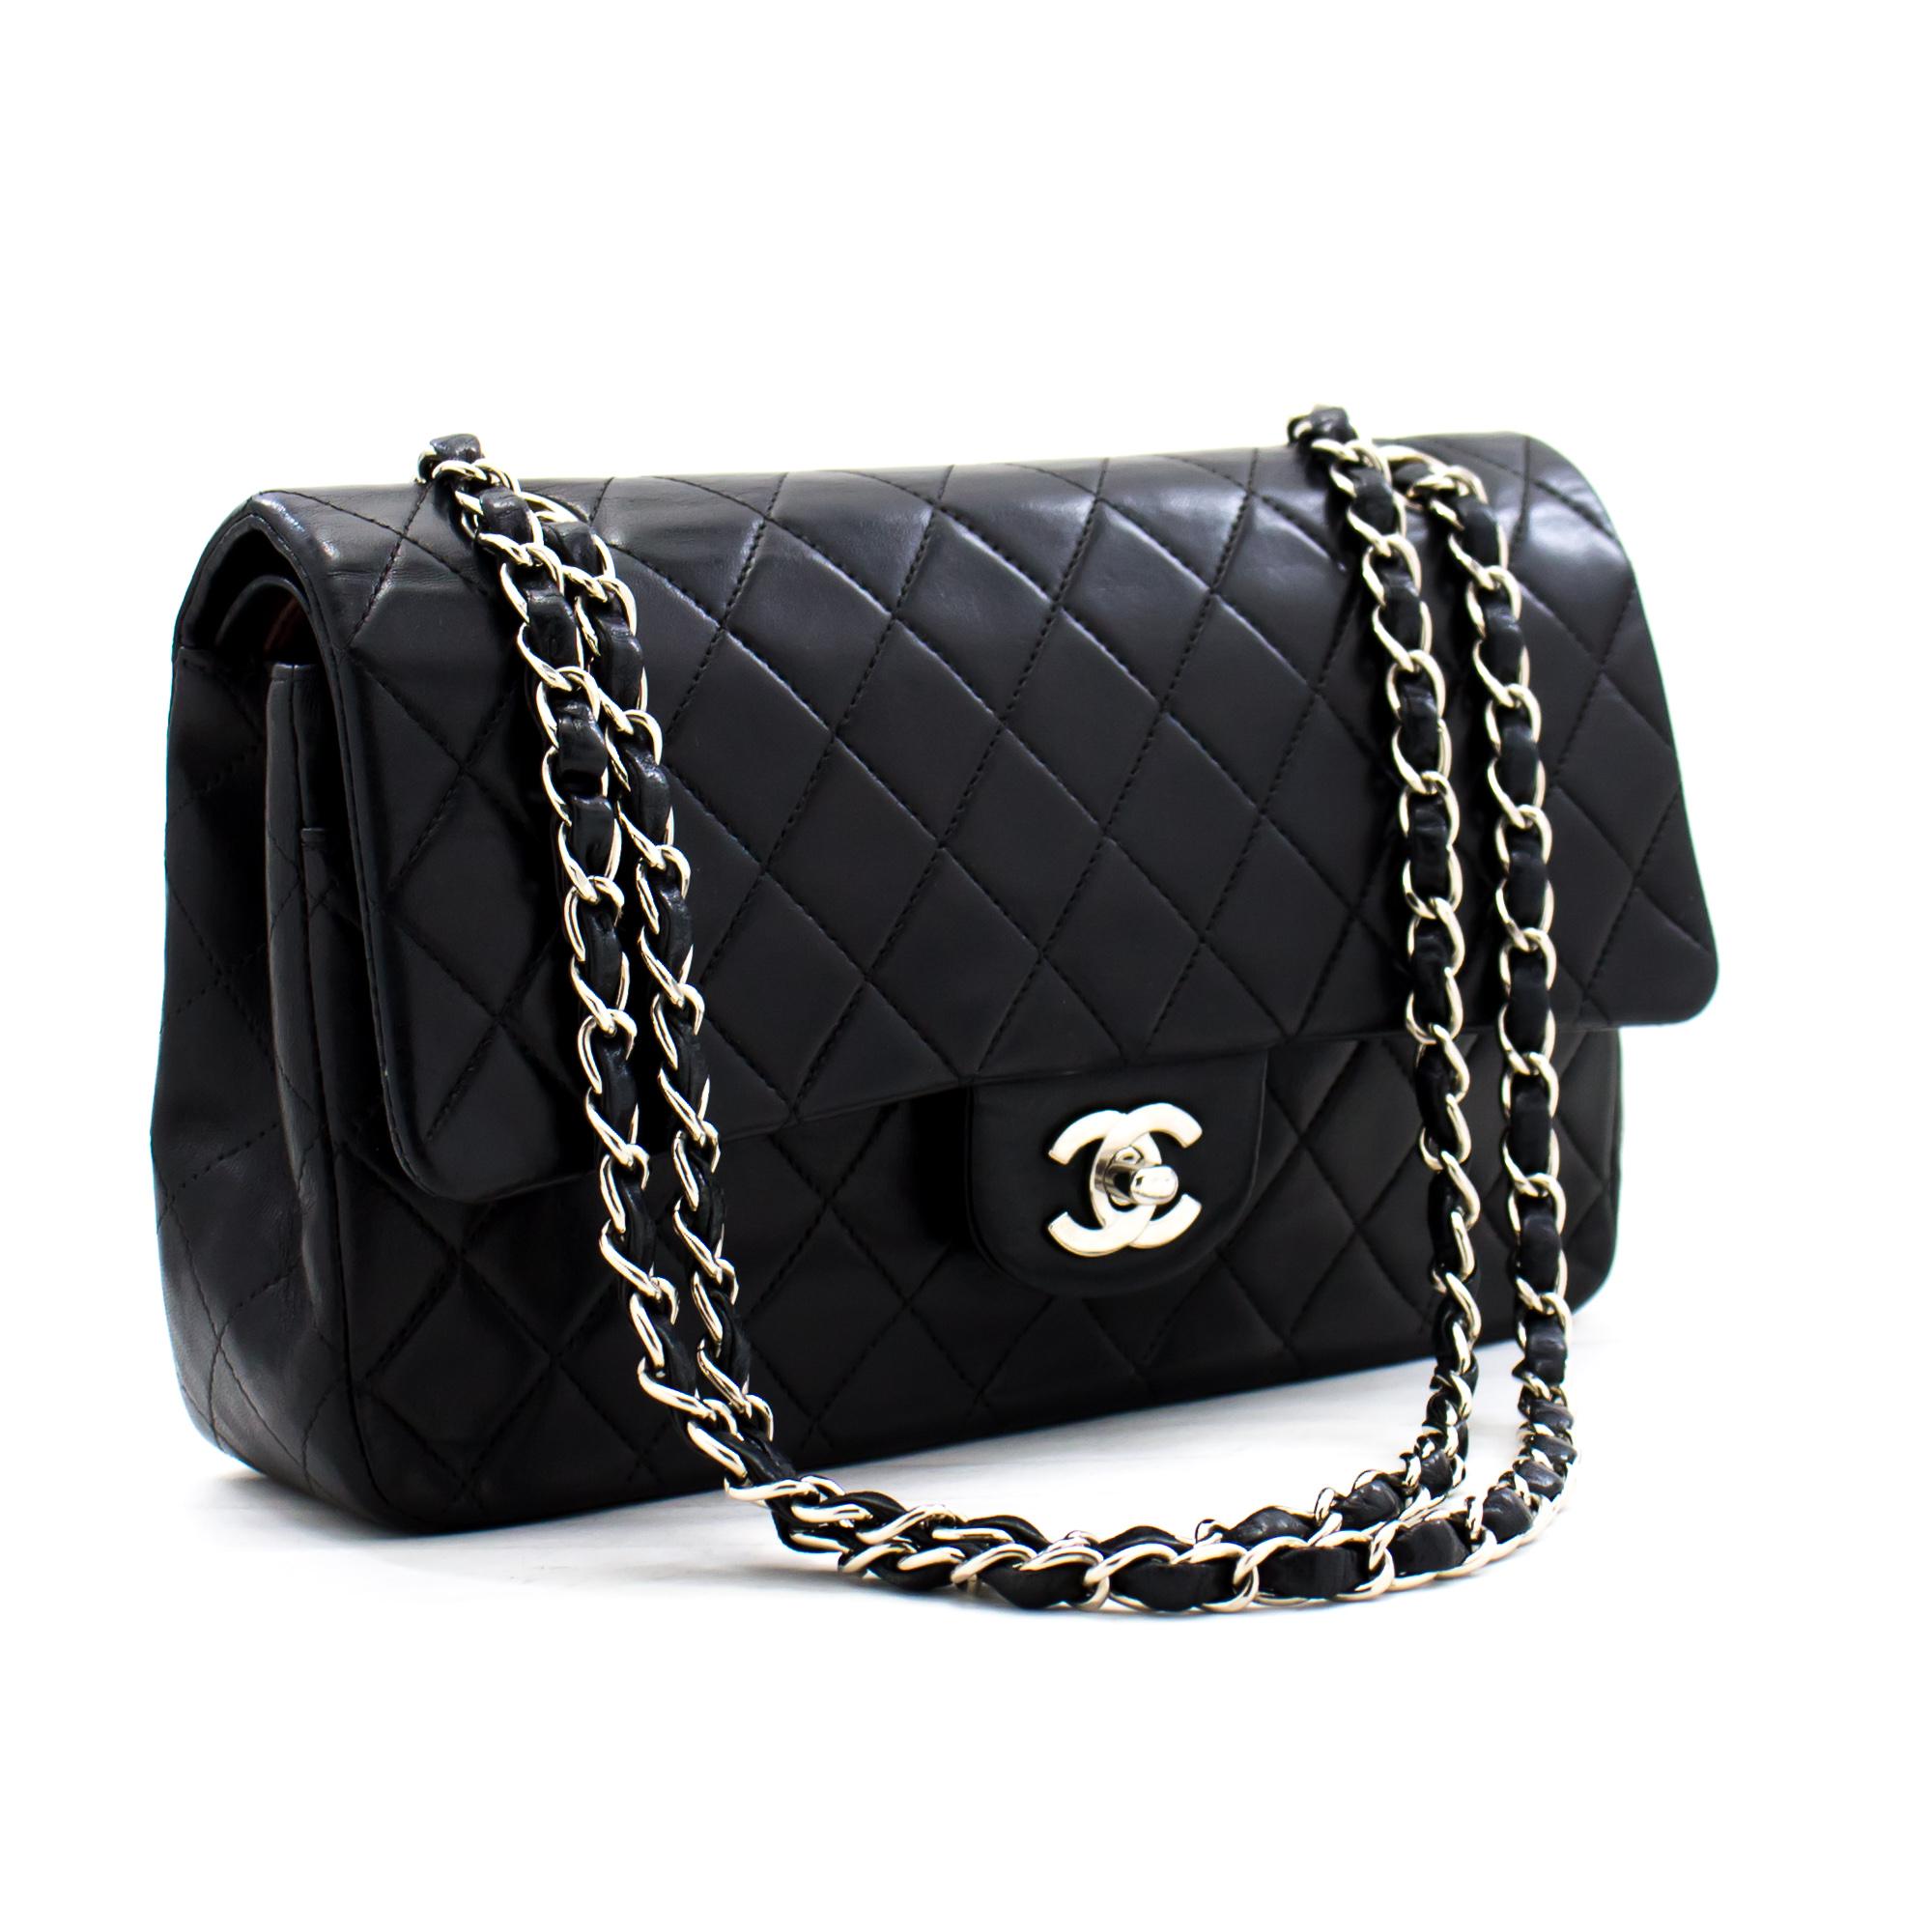 This iconic Chanel 10 inch bag is crafted from quilted black lambskin and features a double flap. On the front flap there is the classic CC logo twist lock, and on the second flap a stud closure with one slip-in pocket. The inside lining is covered